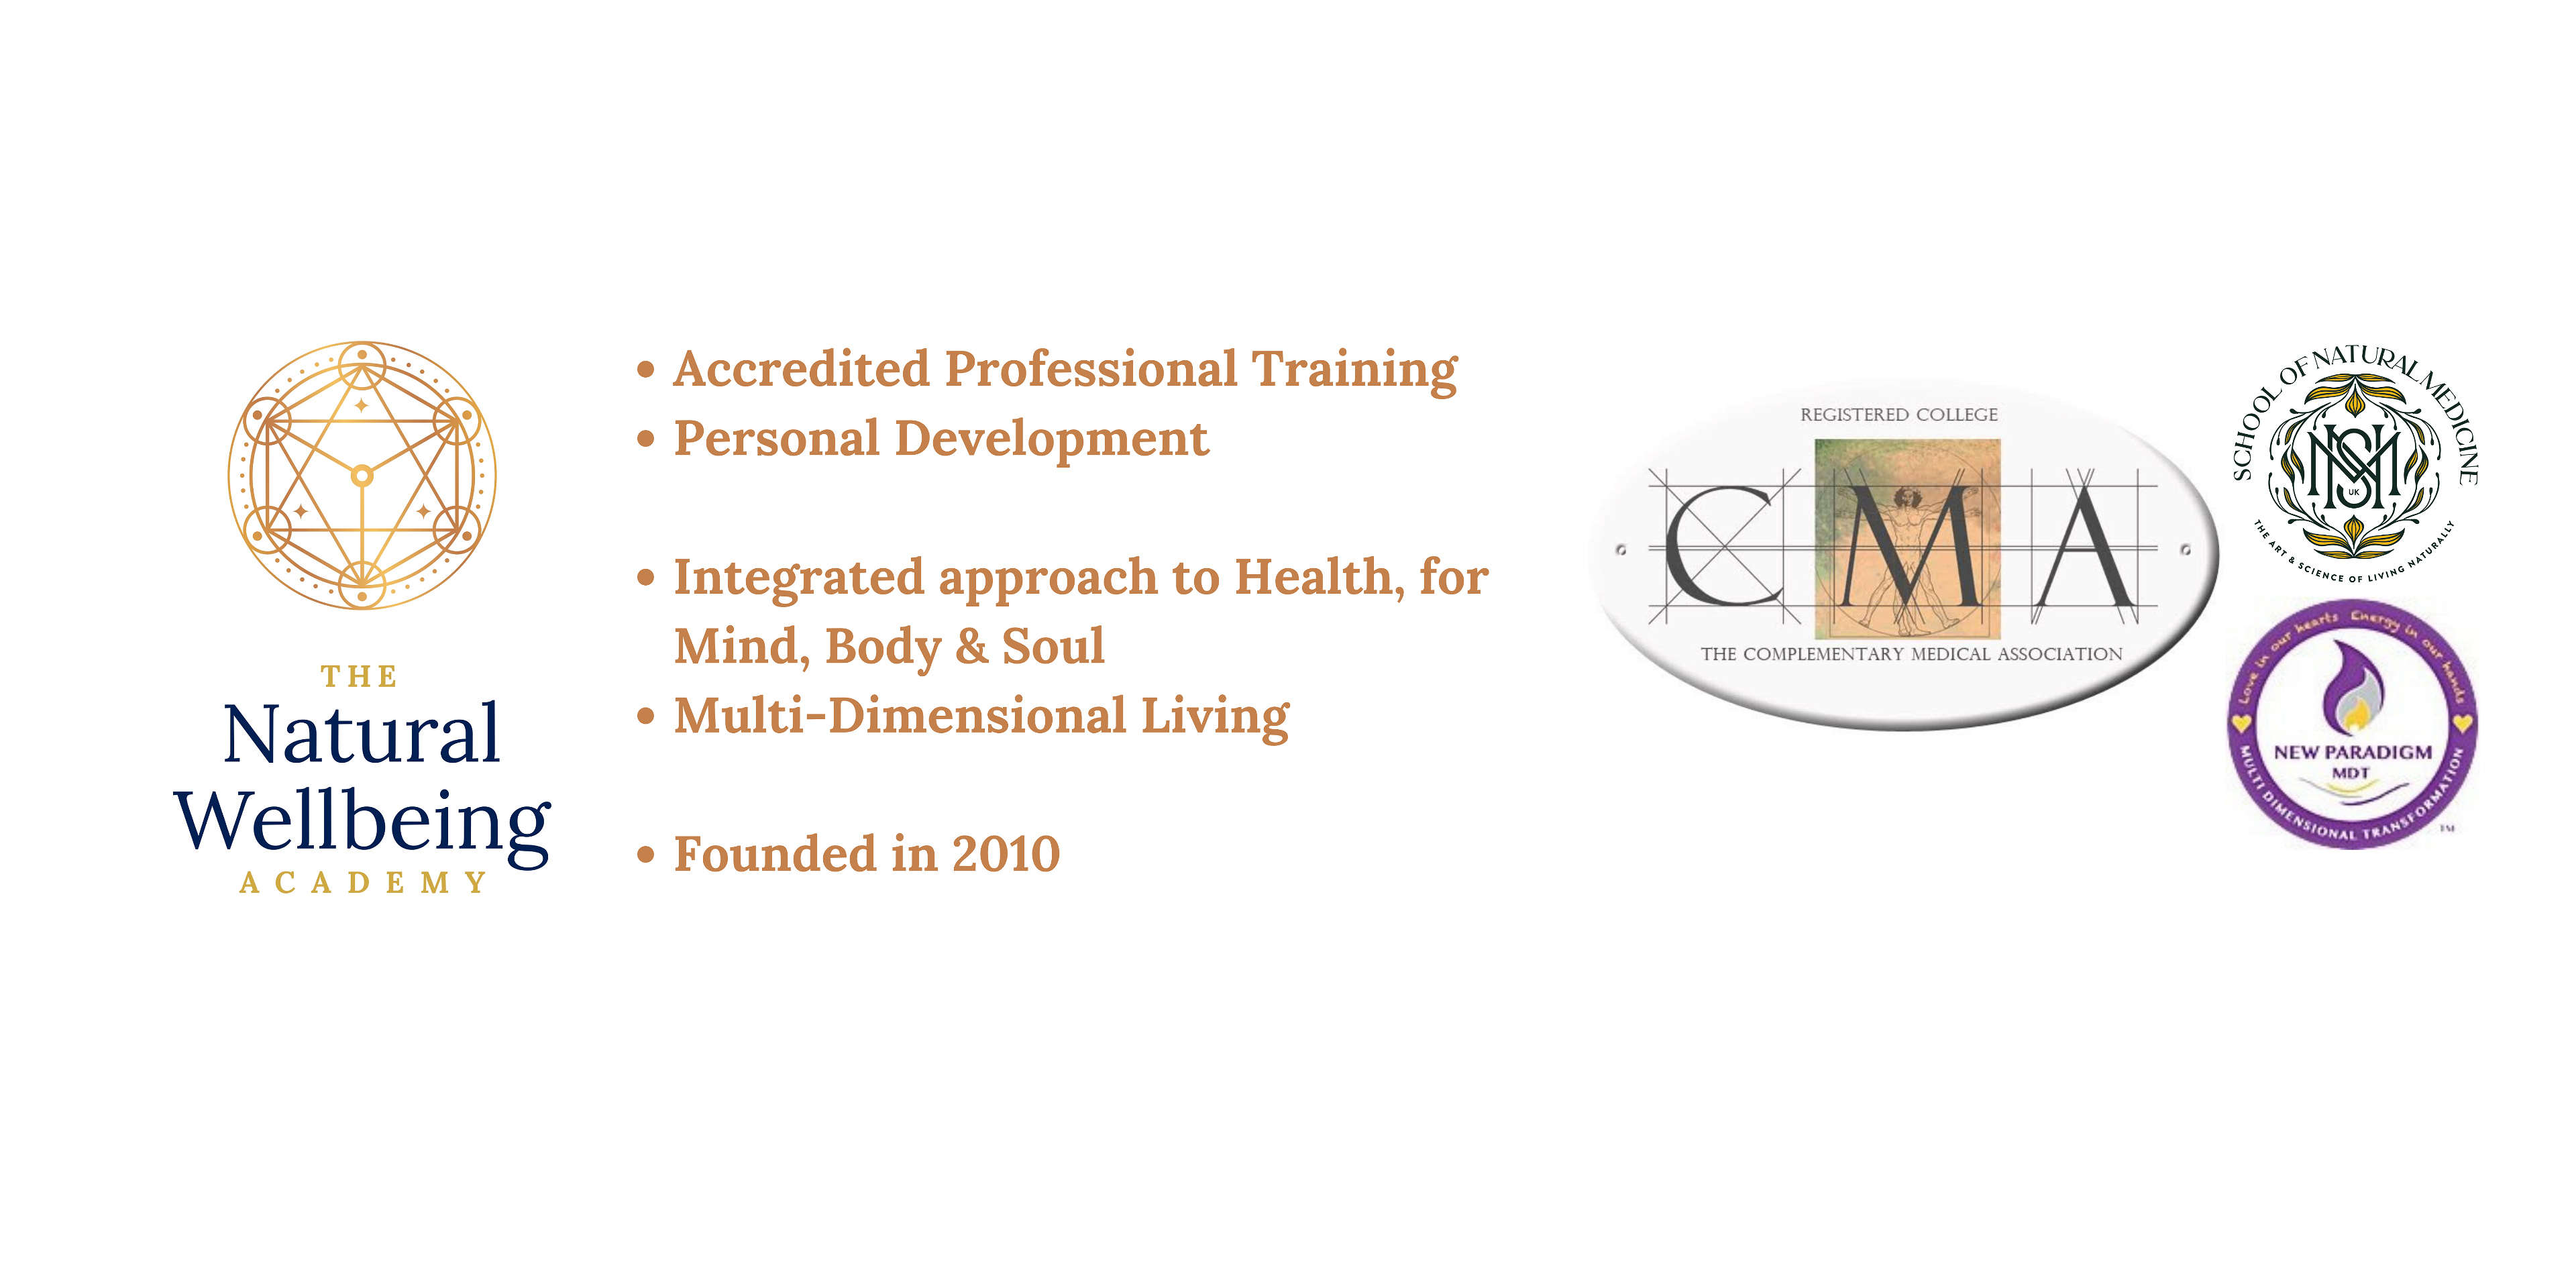 The Natural Wellbeing Academy